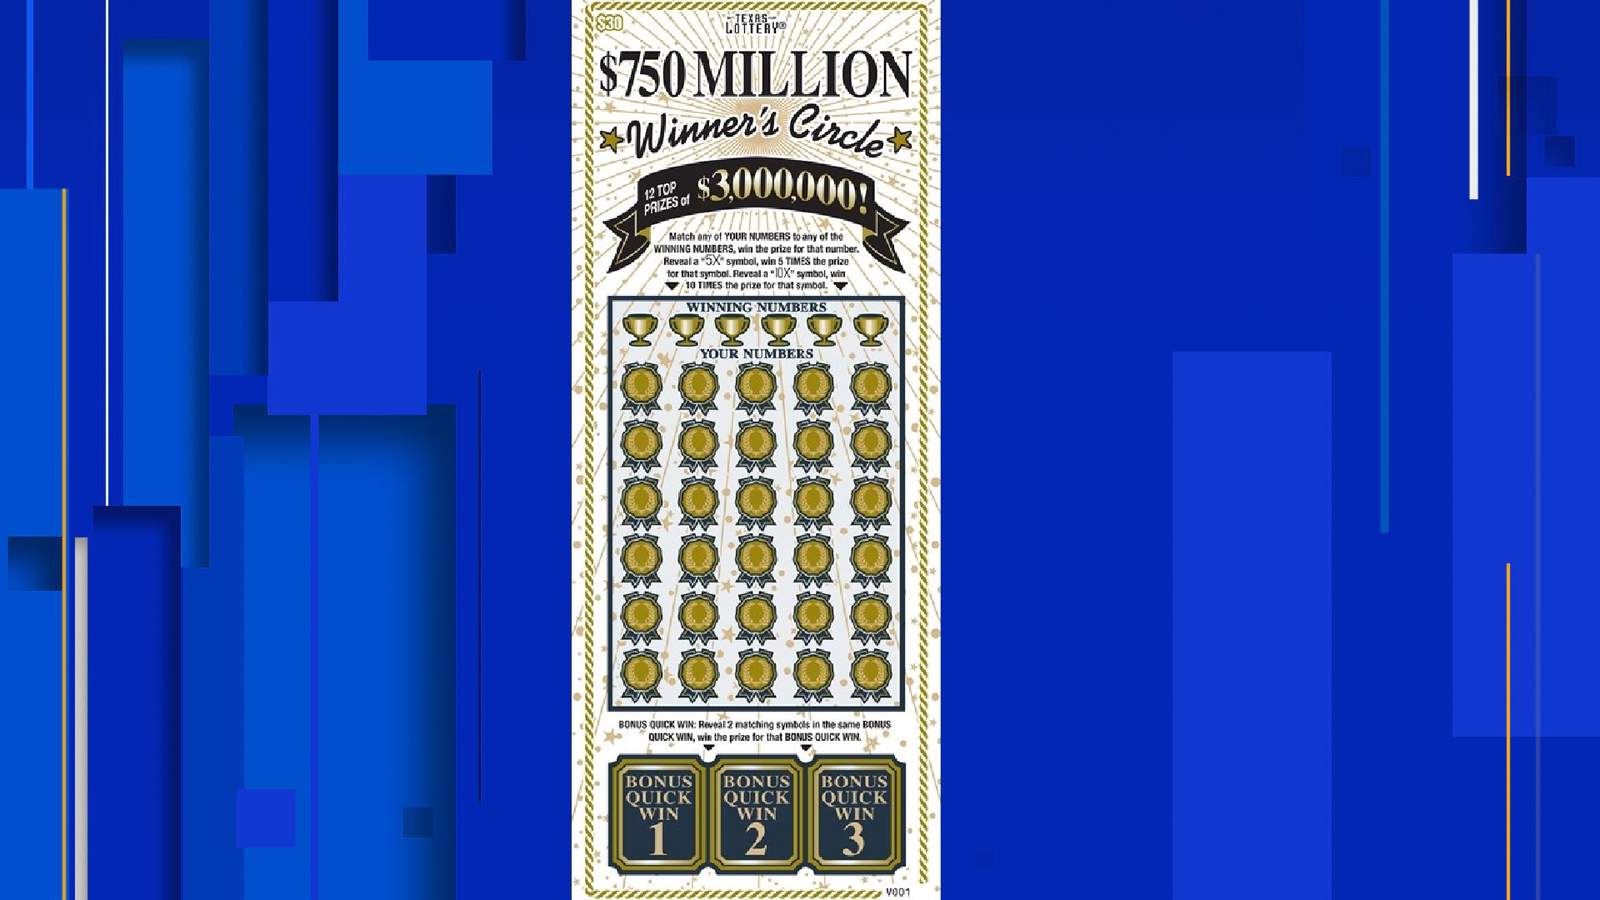 San Antonio resident claims $3 million prize in Texas Lottery scratch ticket game